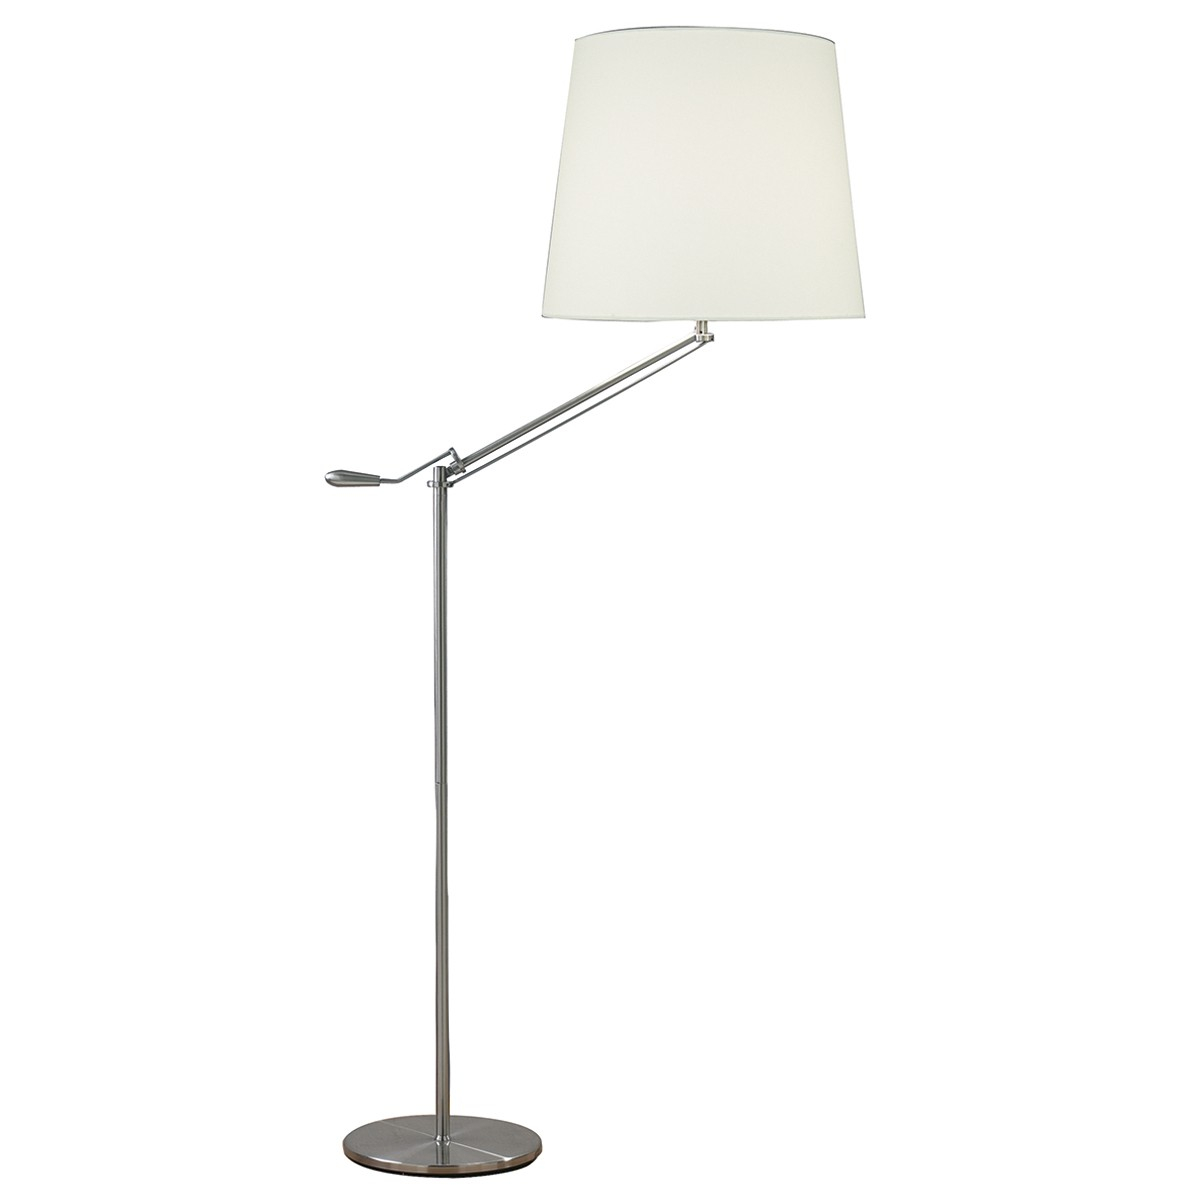 Infusion Satin Chrome Floor Lamp With Shade inside sizing 1199 X 1200